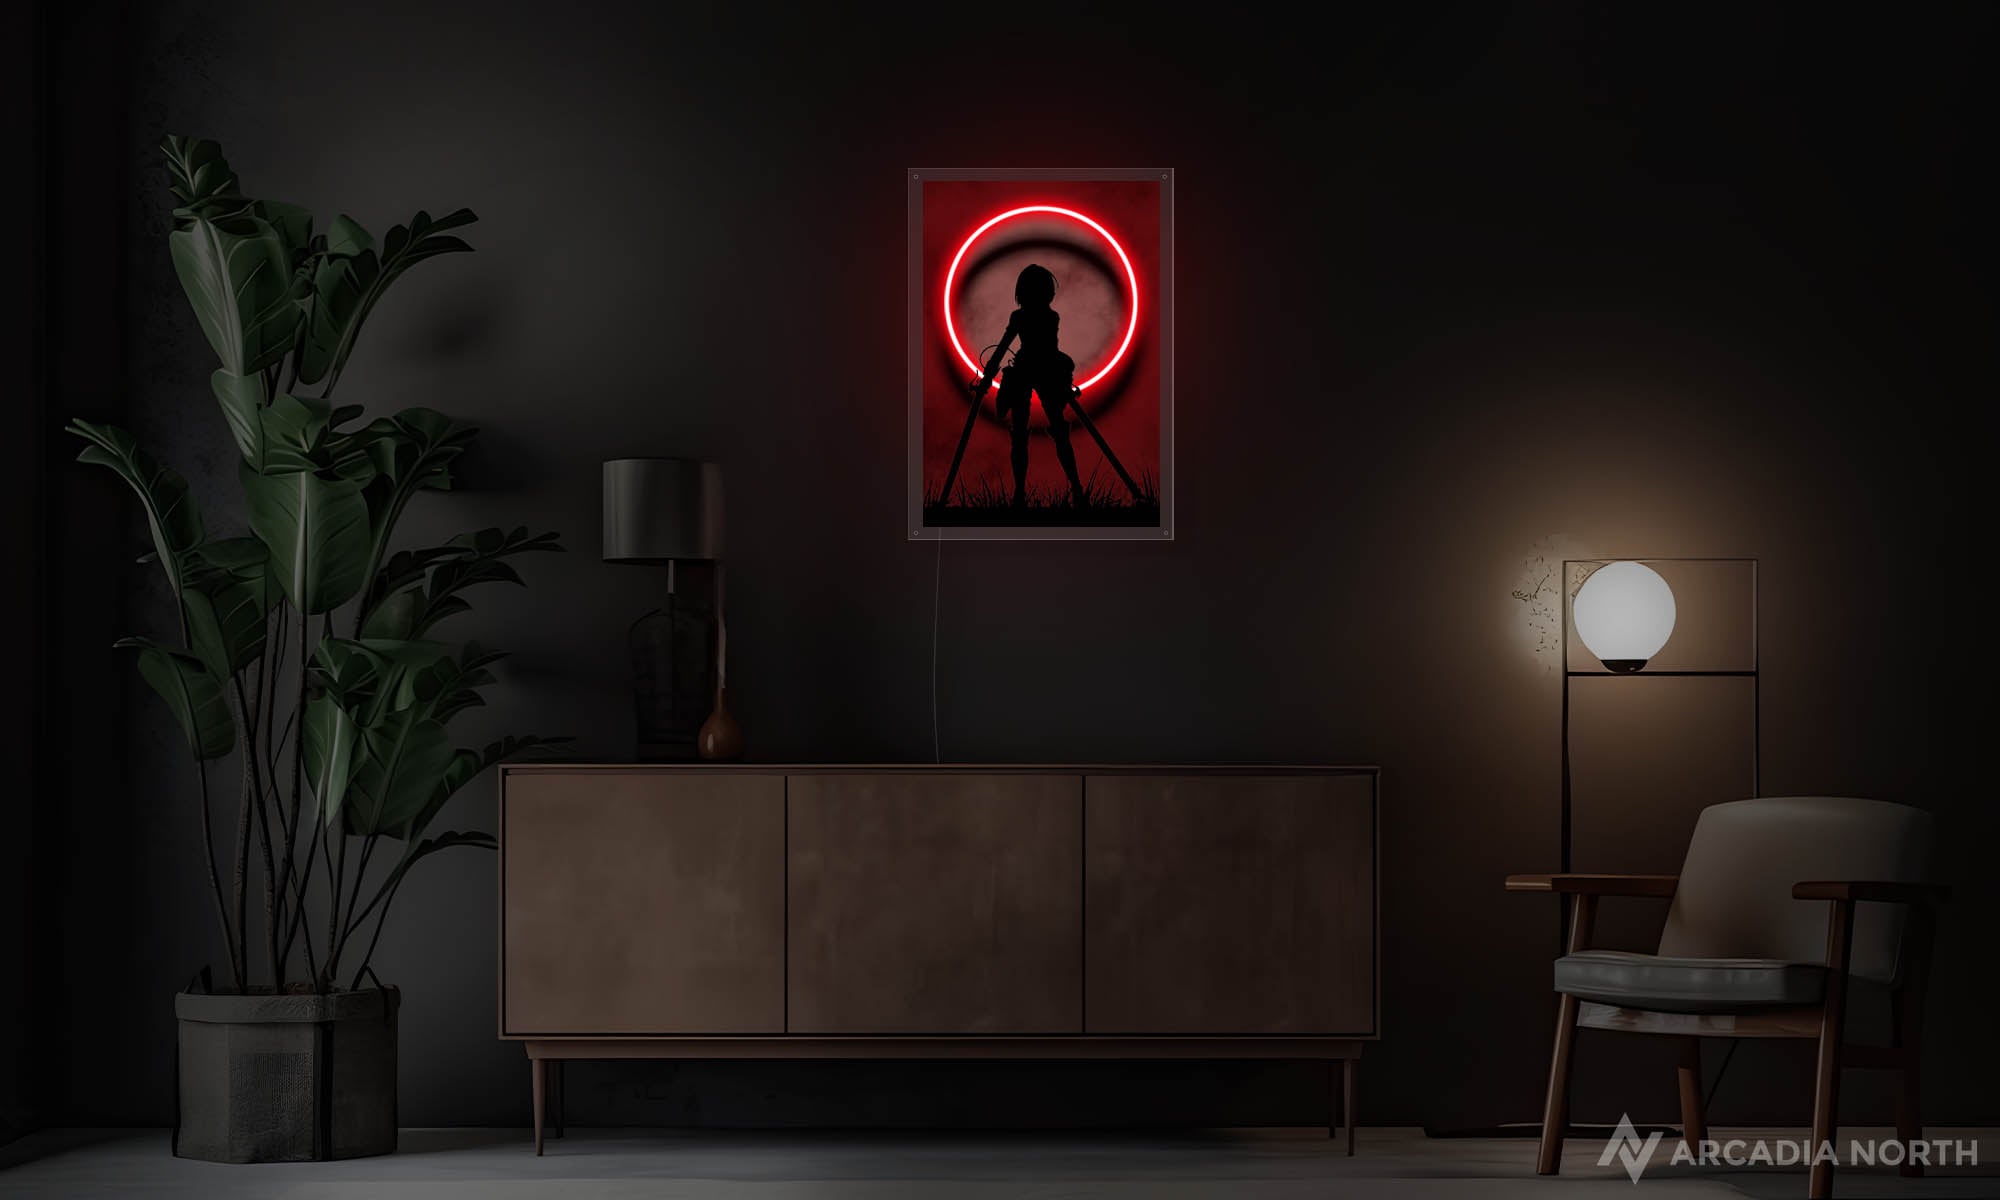 Modern living with an Attack on Titan poster with Mikasa Ackerman's silhouette in front of a red moon outlined by neon lights above the console table - UV printed on acrylic - an Arcadia North Original LED Poster